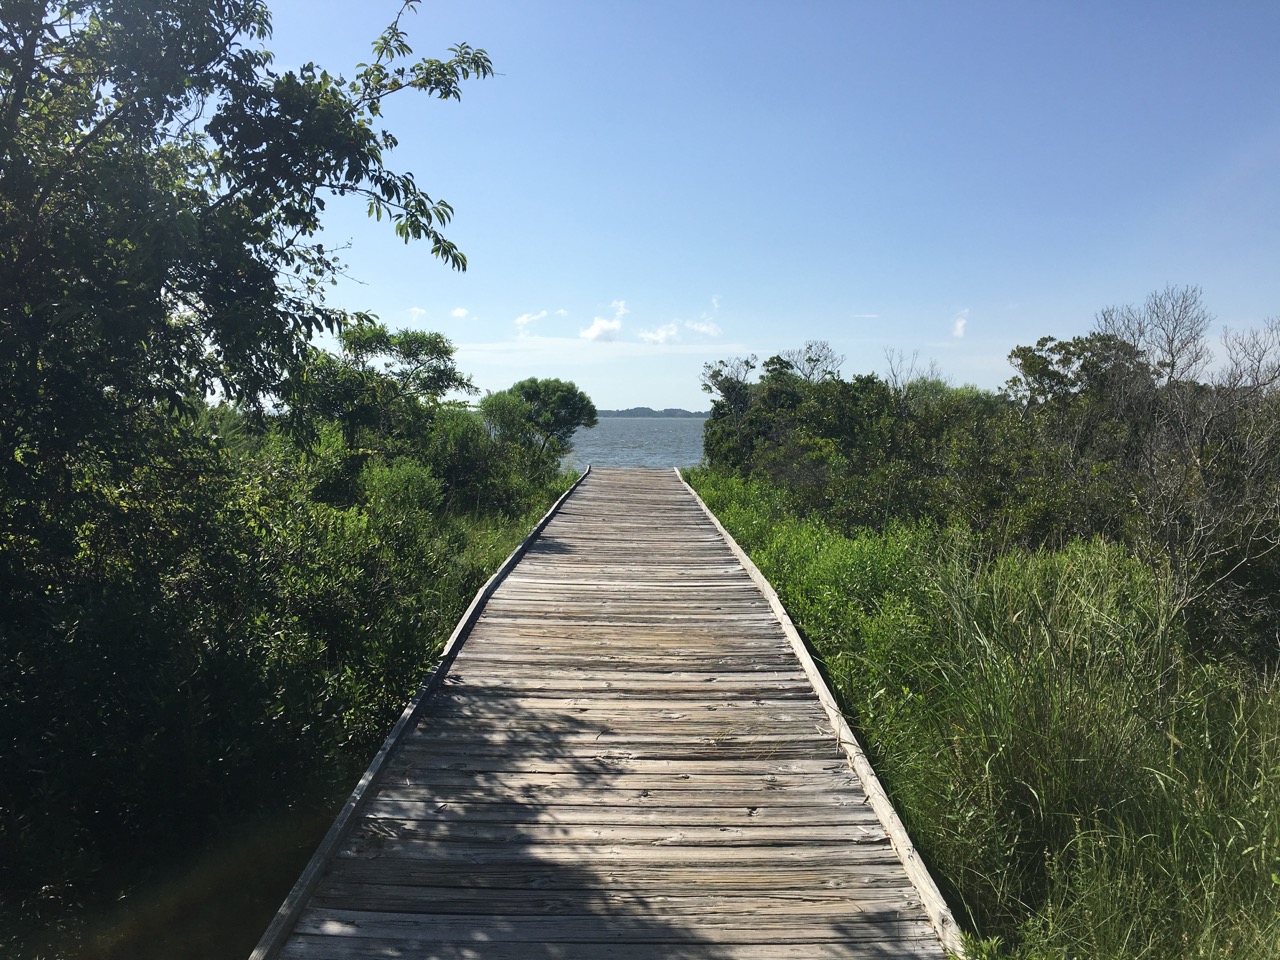 Many of the trails, like this one at Bayside, have boardwalks.